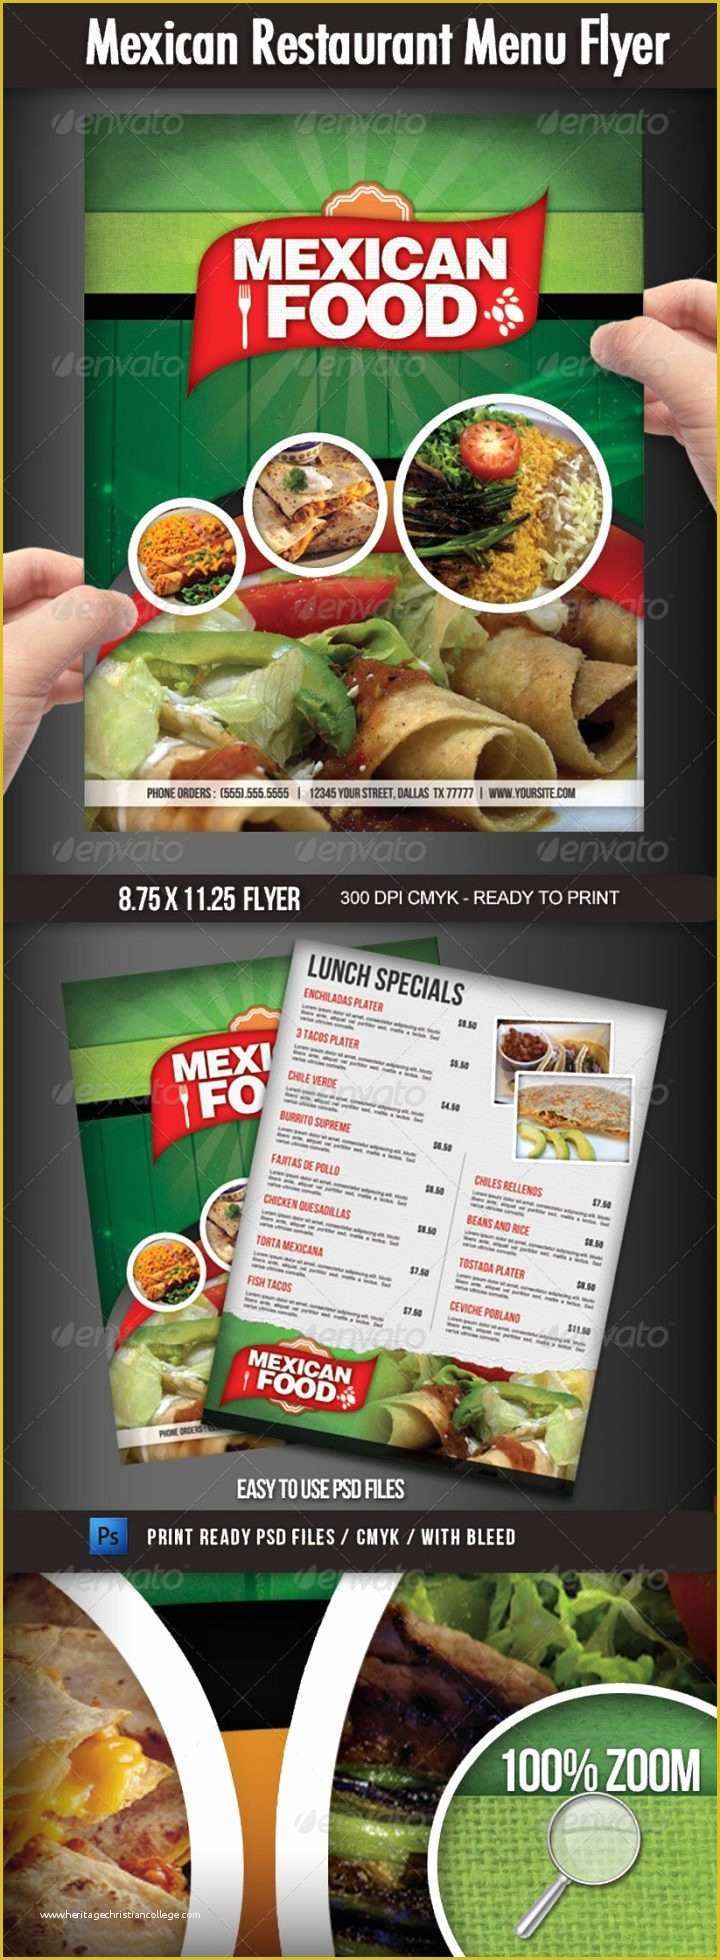 Restaurant Flyers Templates Free Of 9 Mexican Restaurant Menu and Flyer Templates